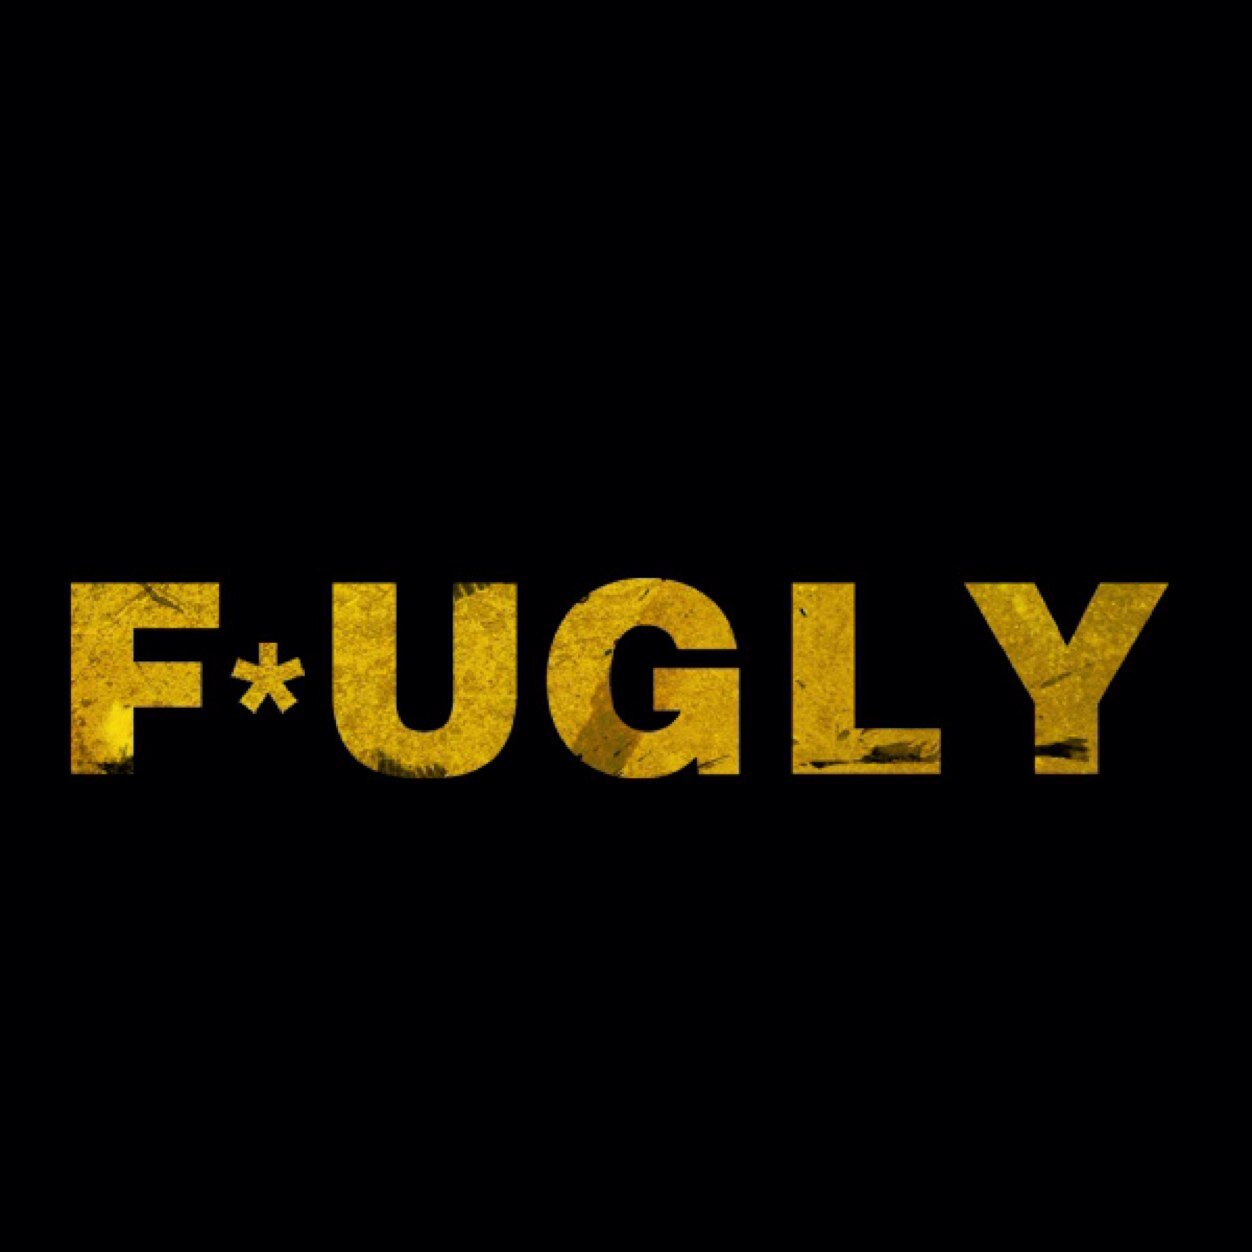 Official Twitter handle of the Fugly,  starring Mohit Marwah, Kiara Advani,Vijender Singh, Arfi Lamba & Jimmy Sheirgill. Released all over on June 13th 2014.